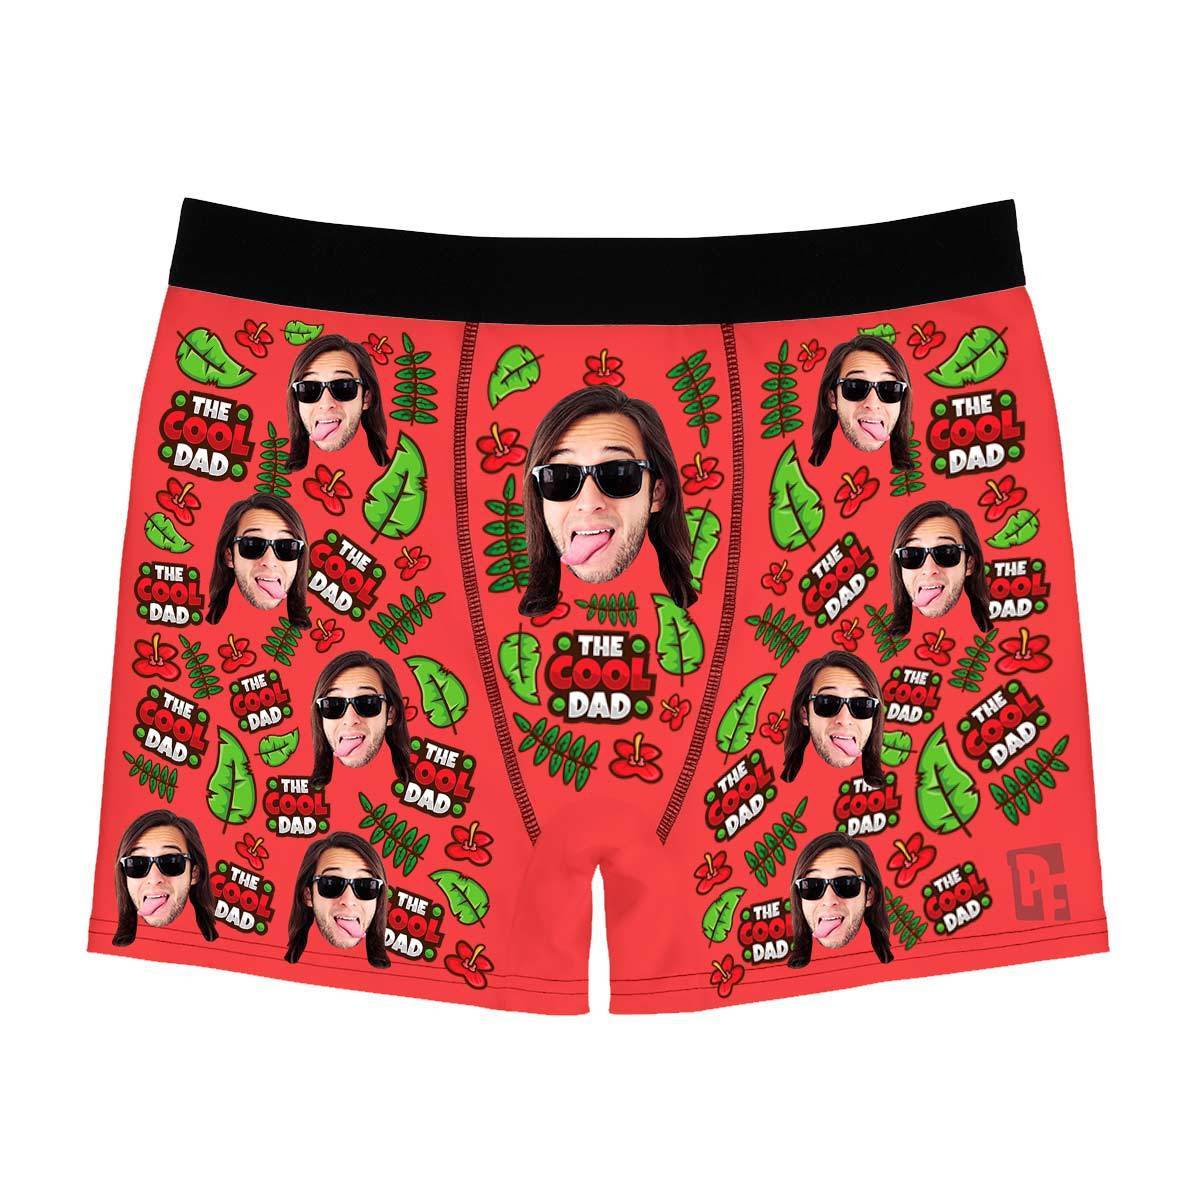 Red The cool dad men's boxer briefs personalized with photo printed on them